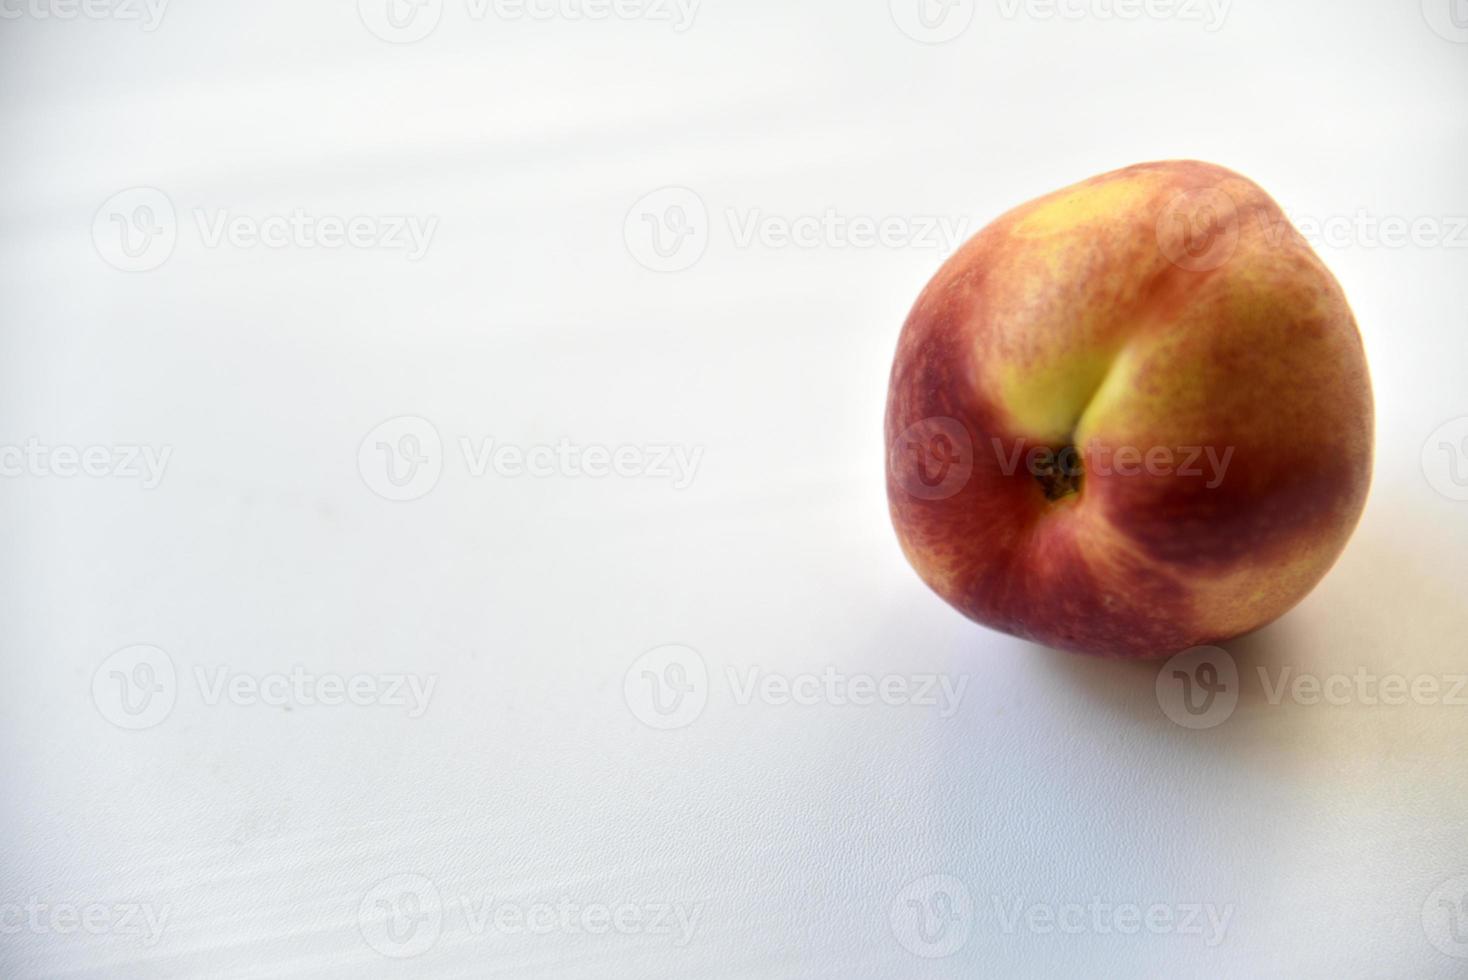 Yellow-red juicy peach nectarine on a white plate photo